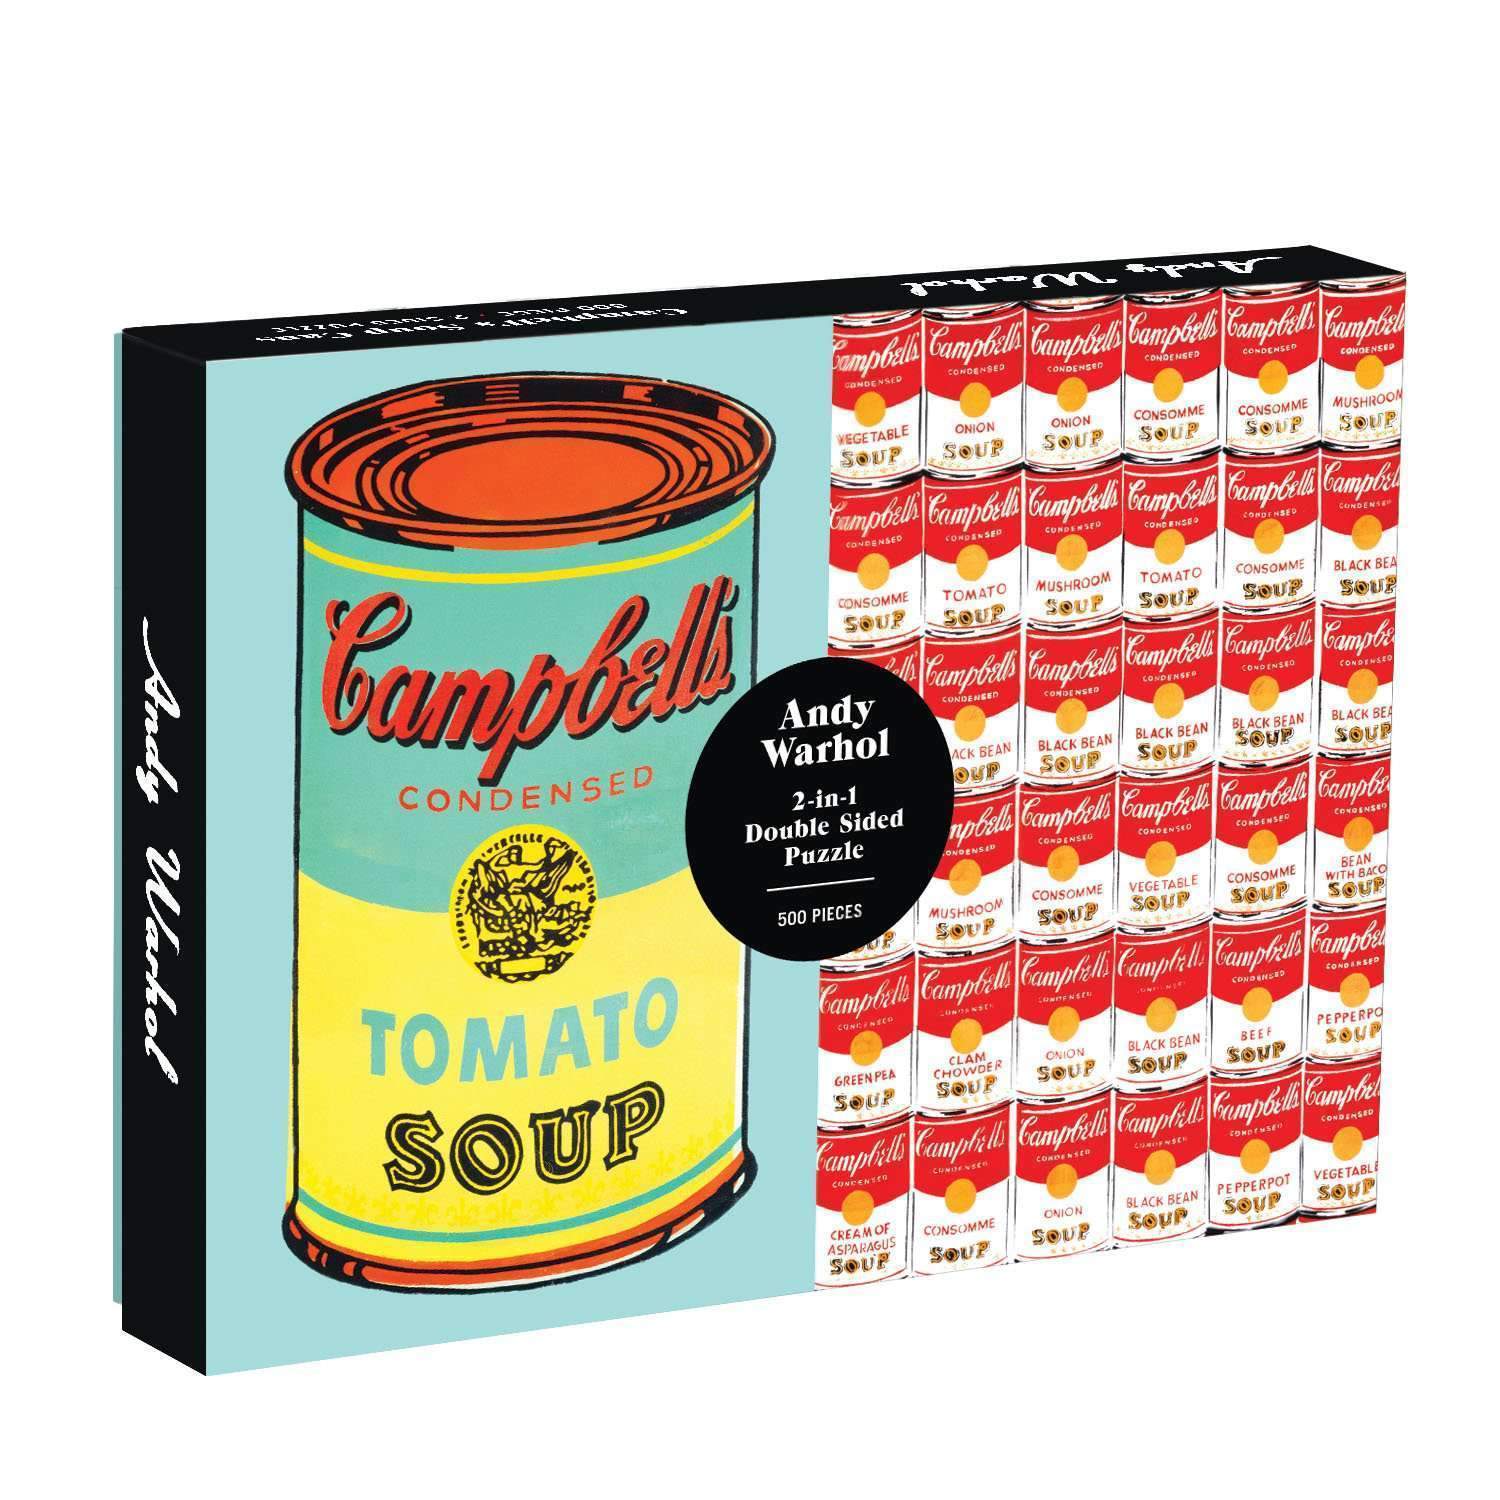 Andy Warhol: Campbell's Soup 2-in-1 Double Sided Puzzle (500 pc)